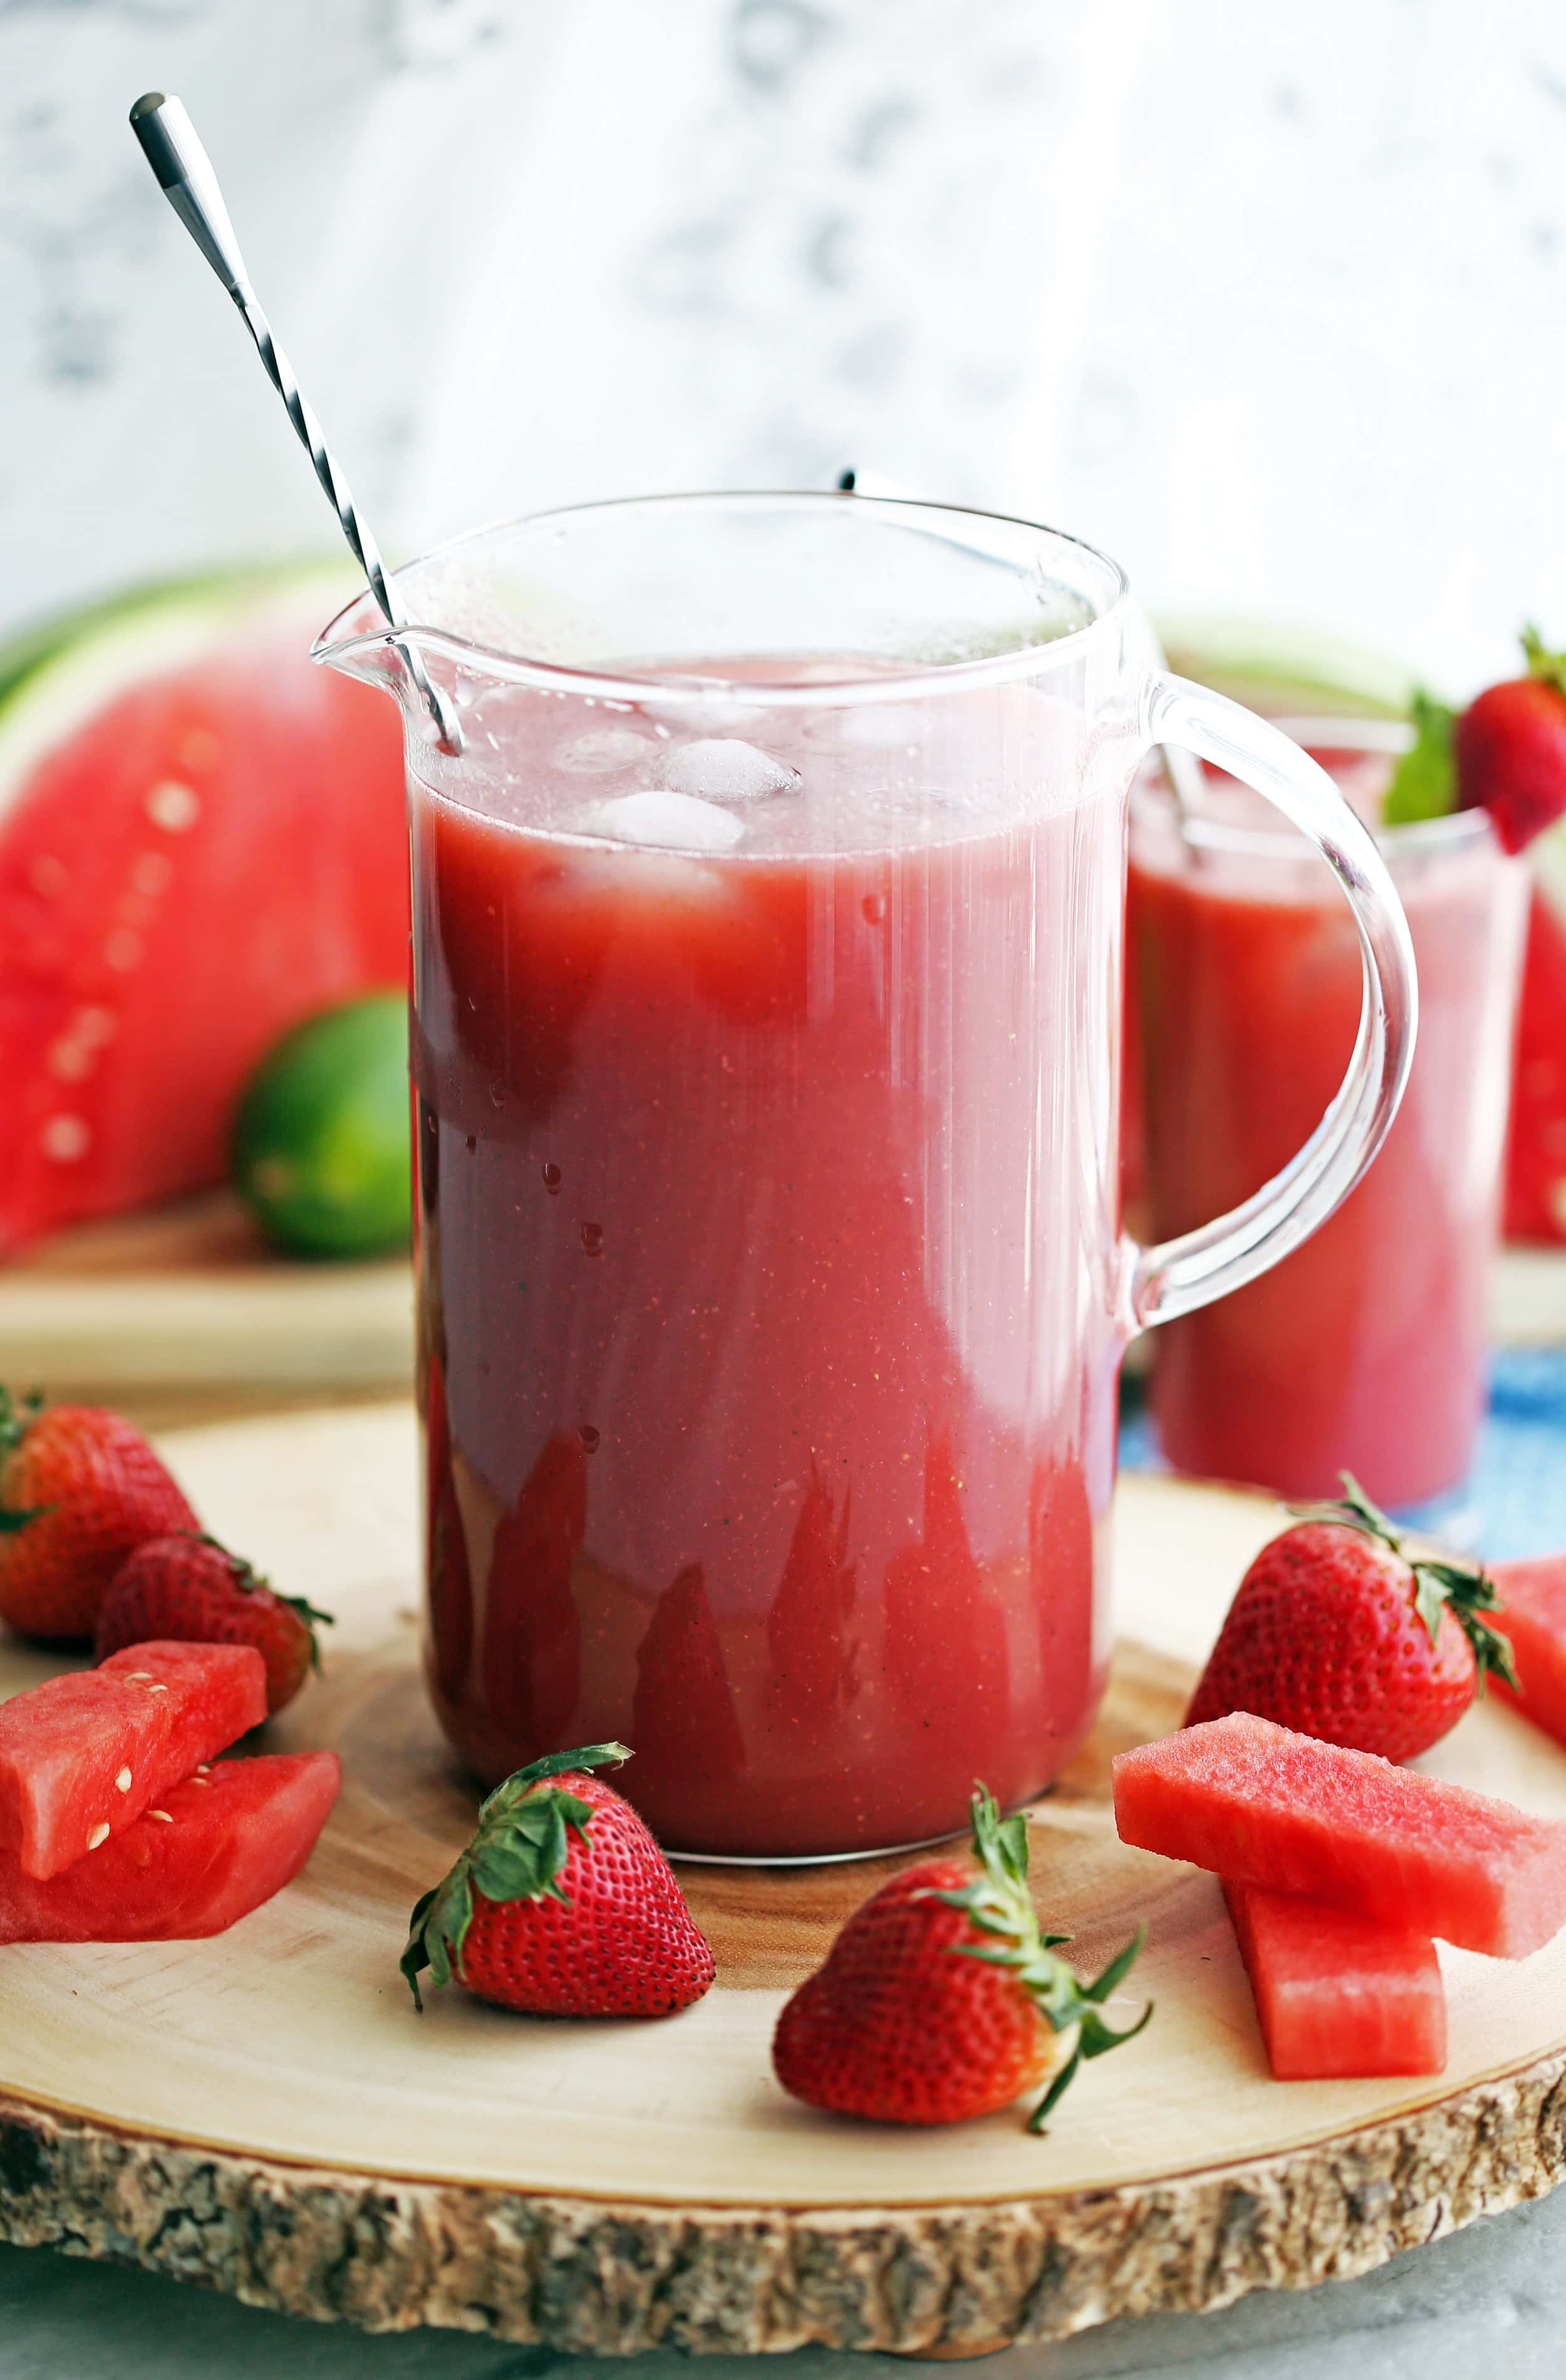 A glass pitcher full of Fresh Watermelon Strawberry Soda that's surrounded by fresh strawberries and watermelon pieces.